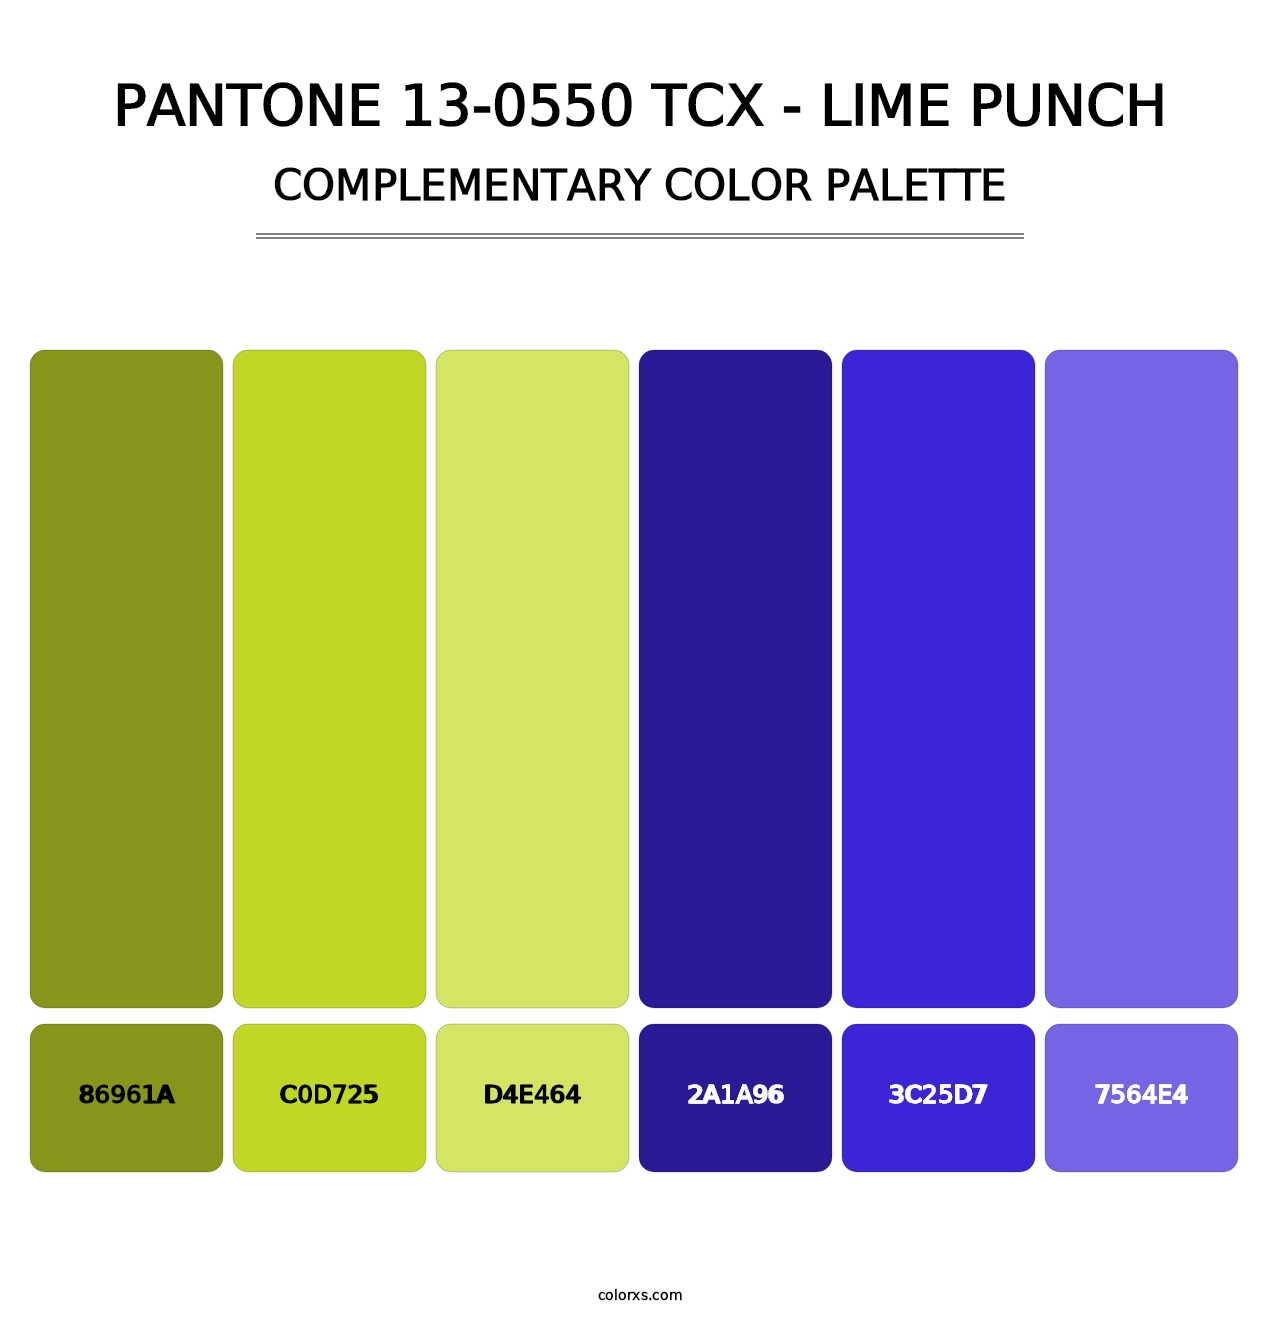 PANTONE 13-0550 TCX - Lime Punch - Complementary Color Palette